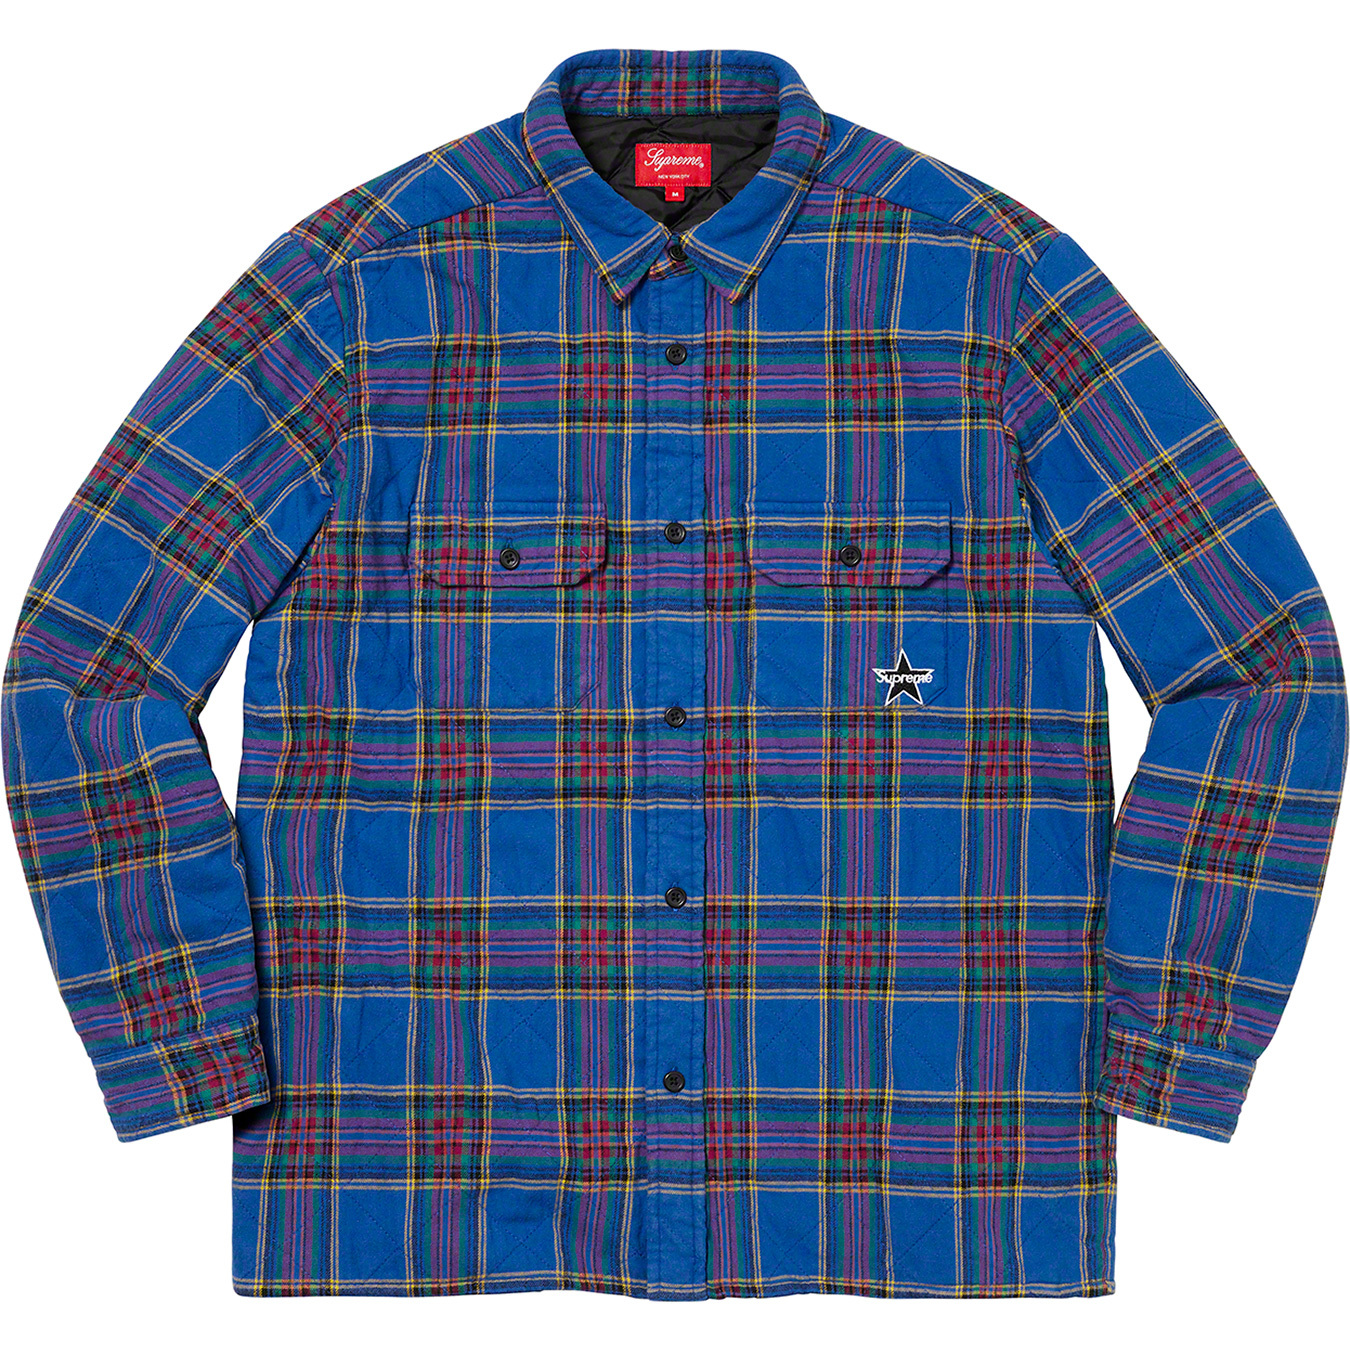 Quilted Plaid Flannel Shirt - fall winter 2021 - Supreme